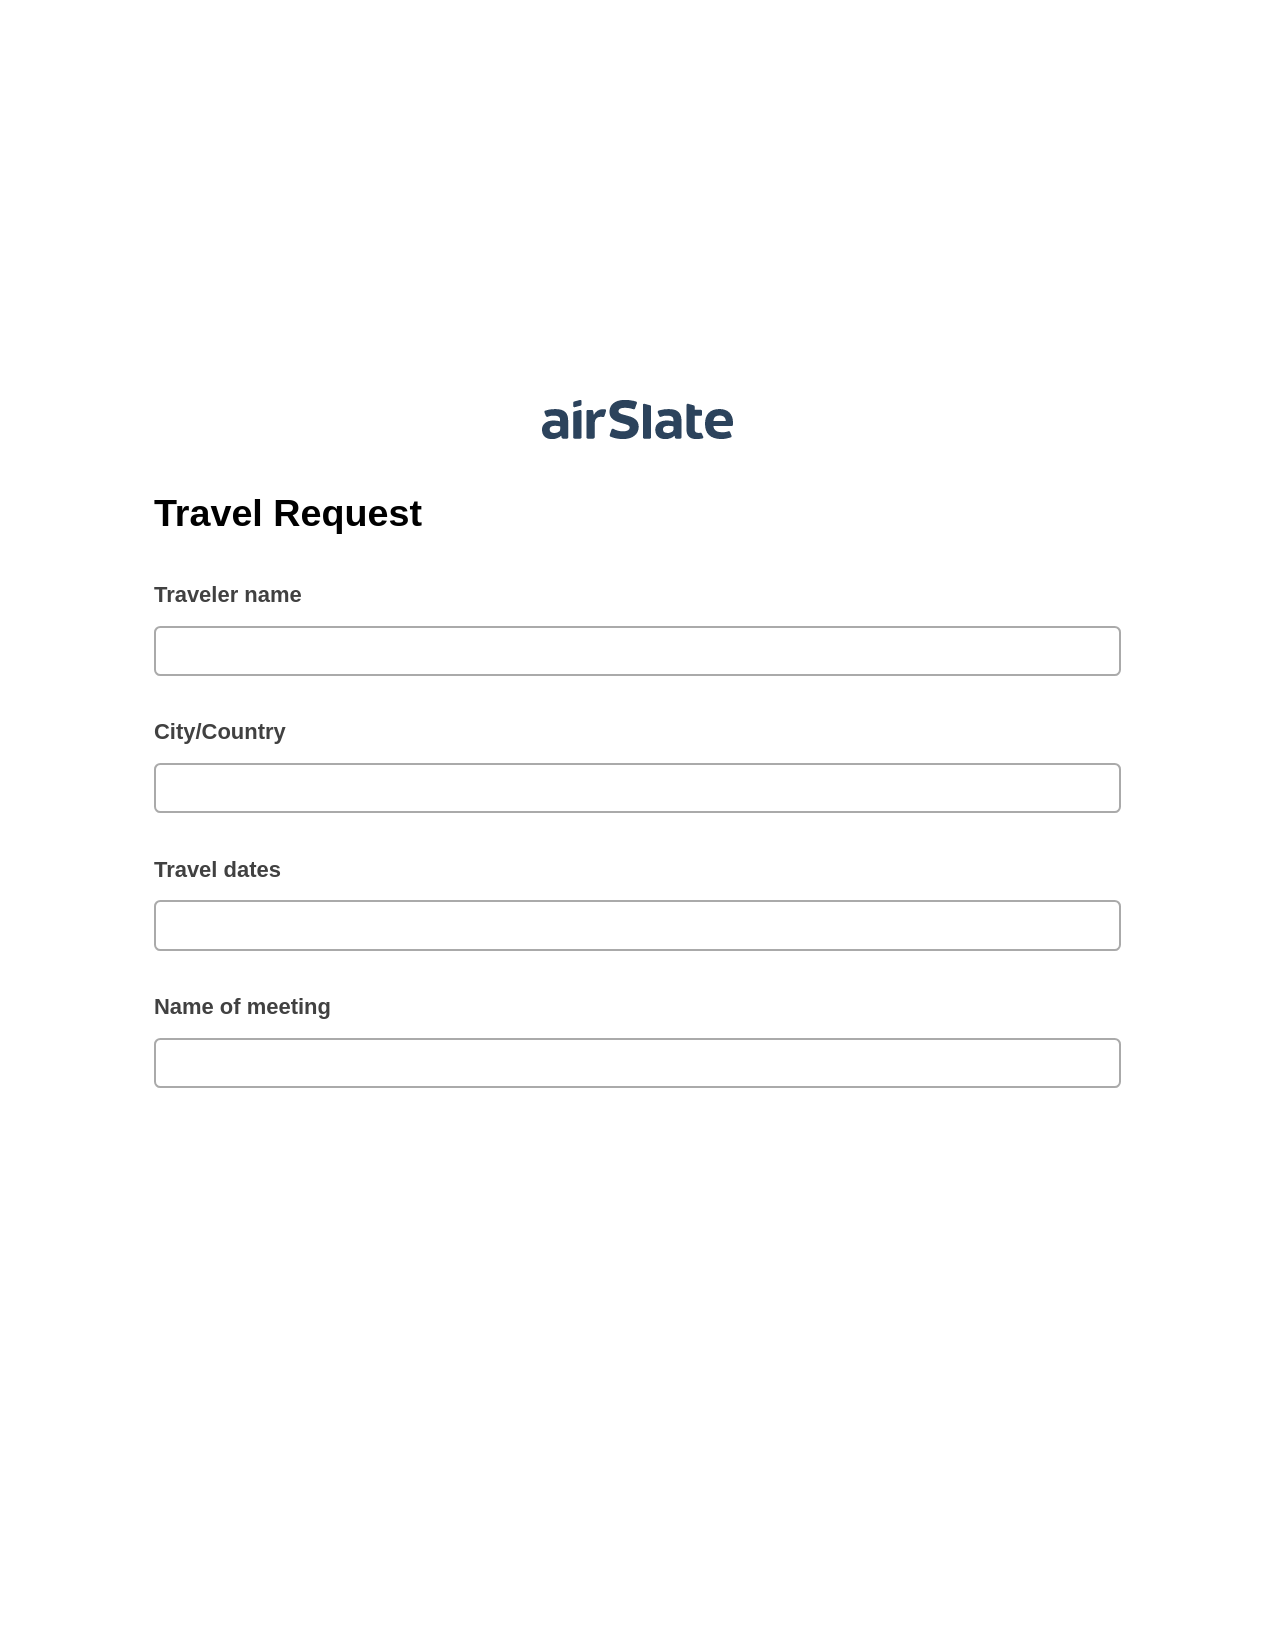 Travel Request Pre-fill Dropdown from Airtable, Jira Bot, Slack Two-Way Binding Bot